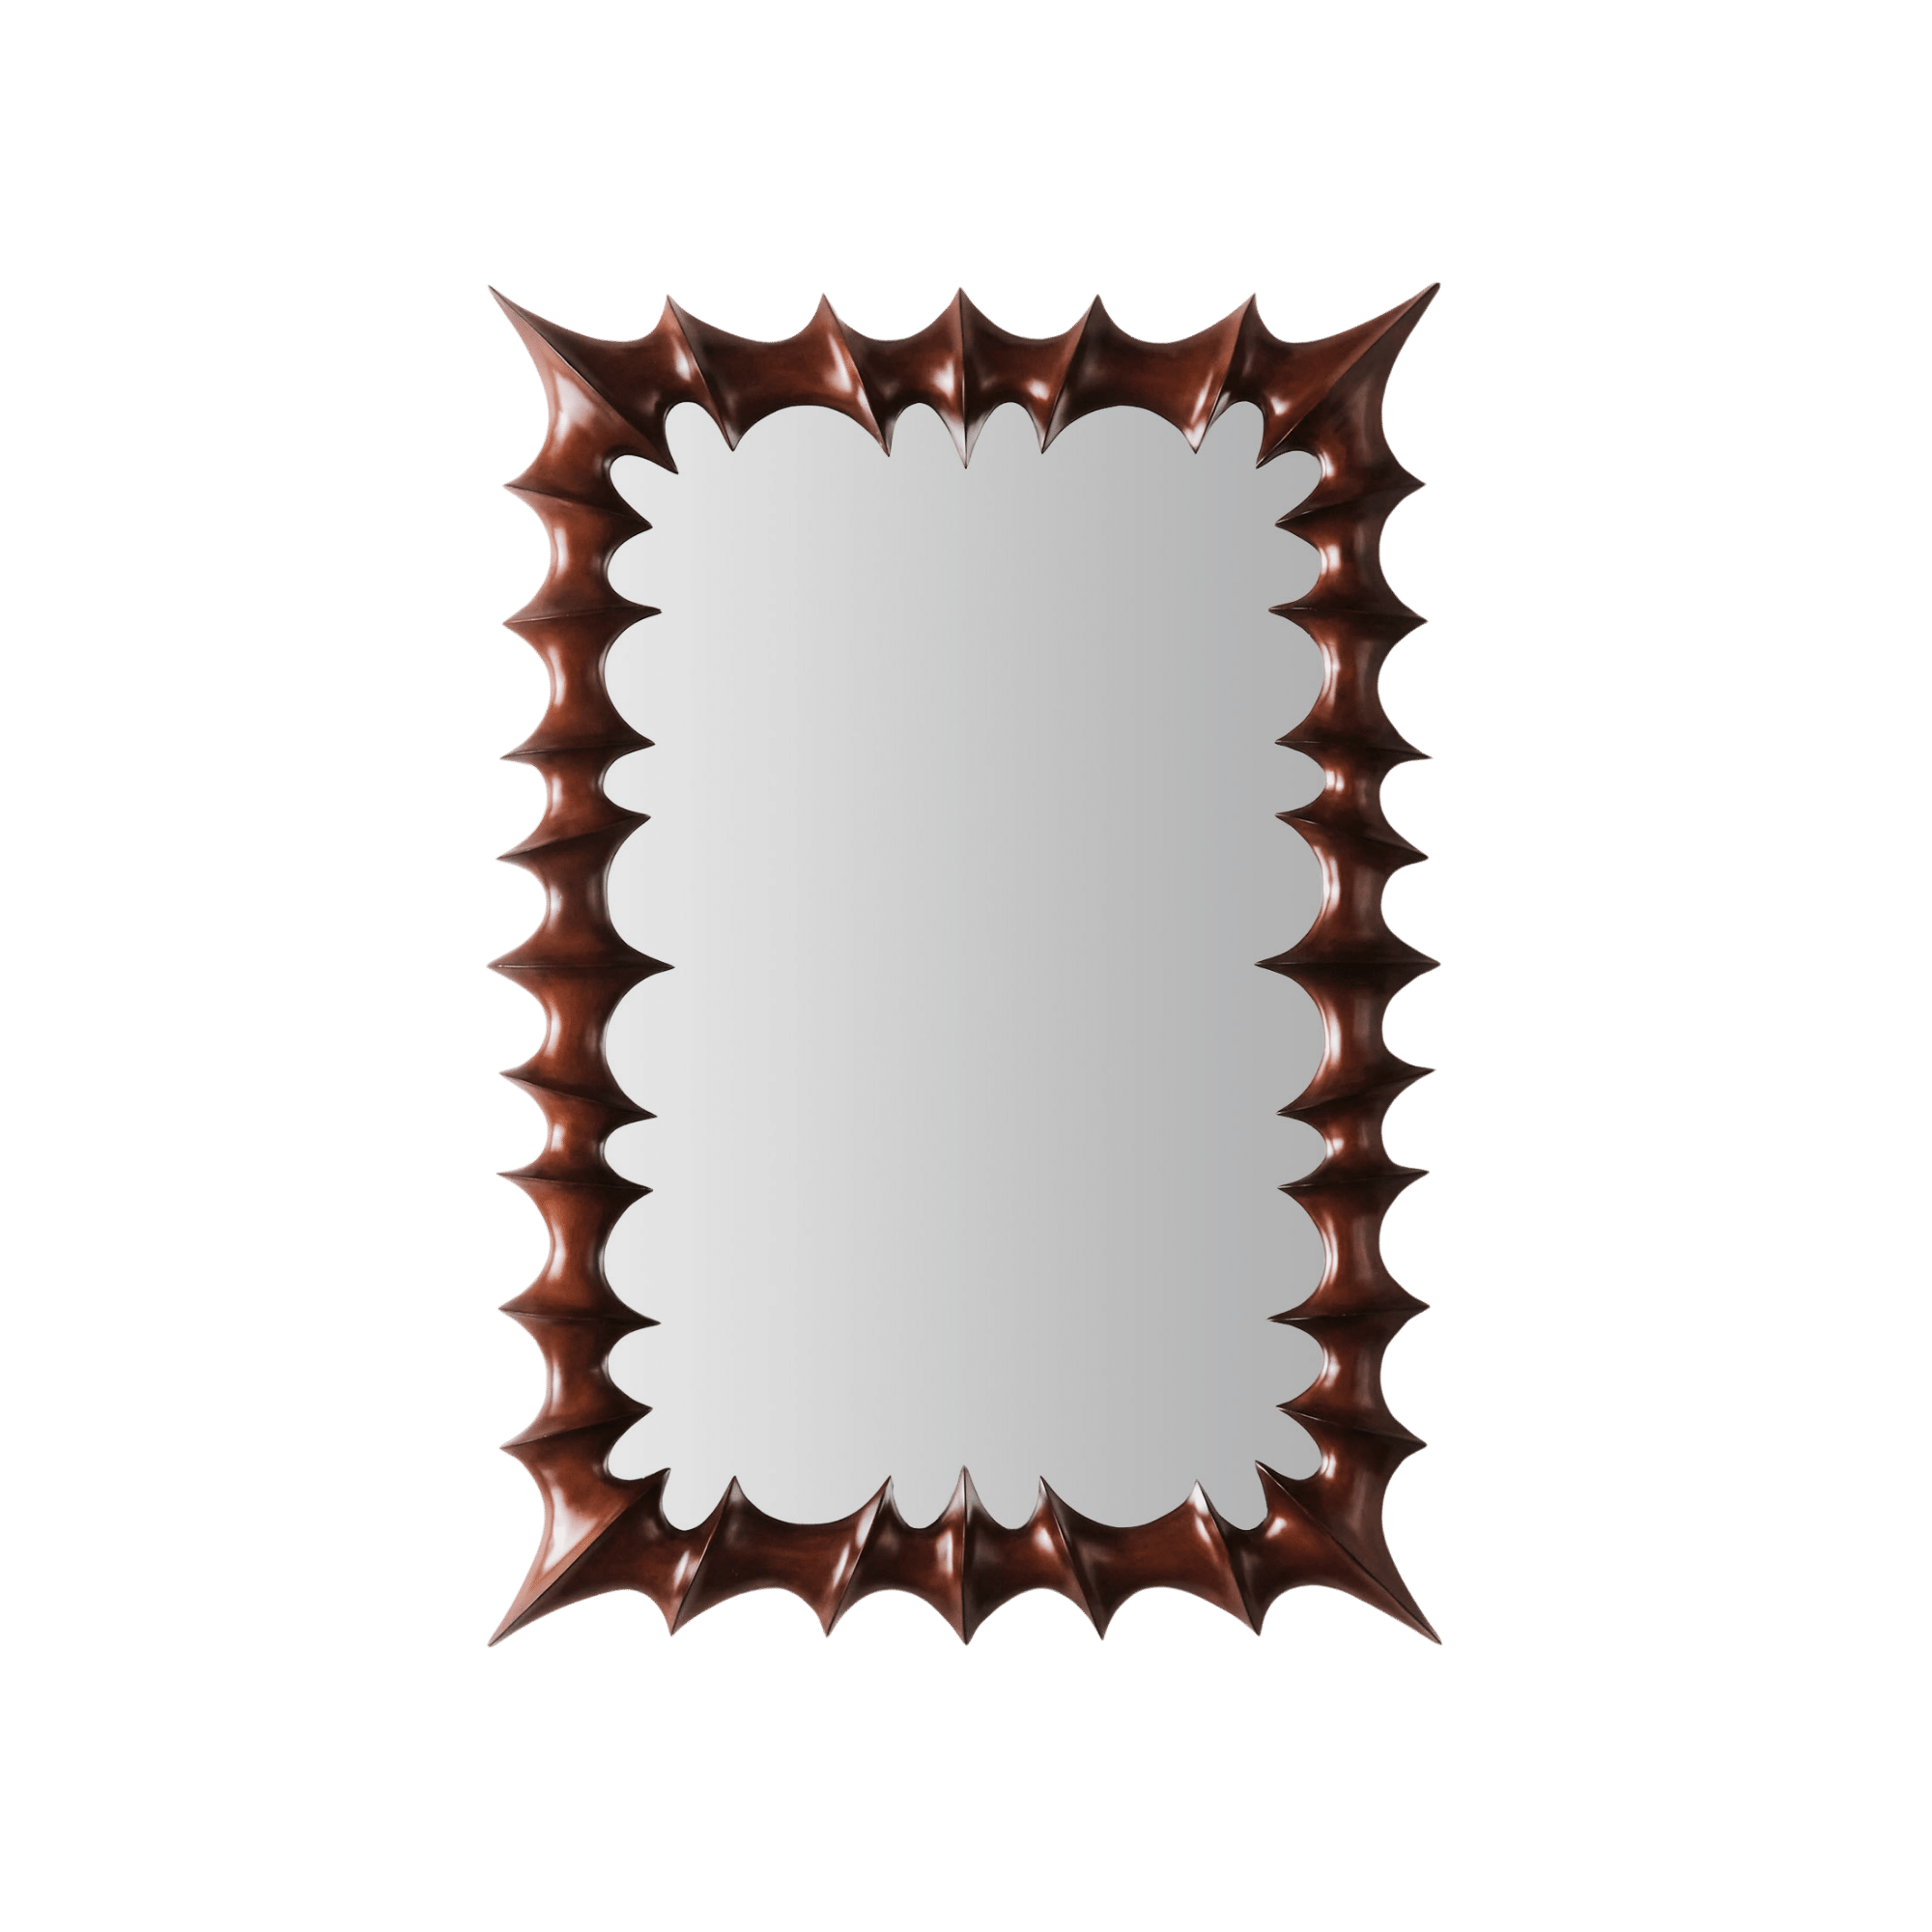 Brutalist Mirror Small Natural Wood